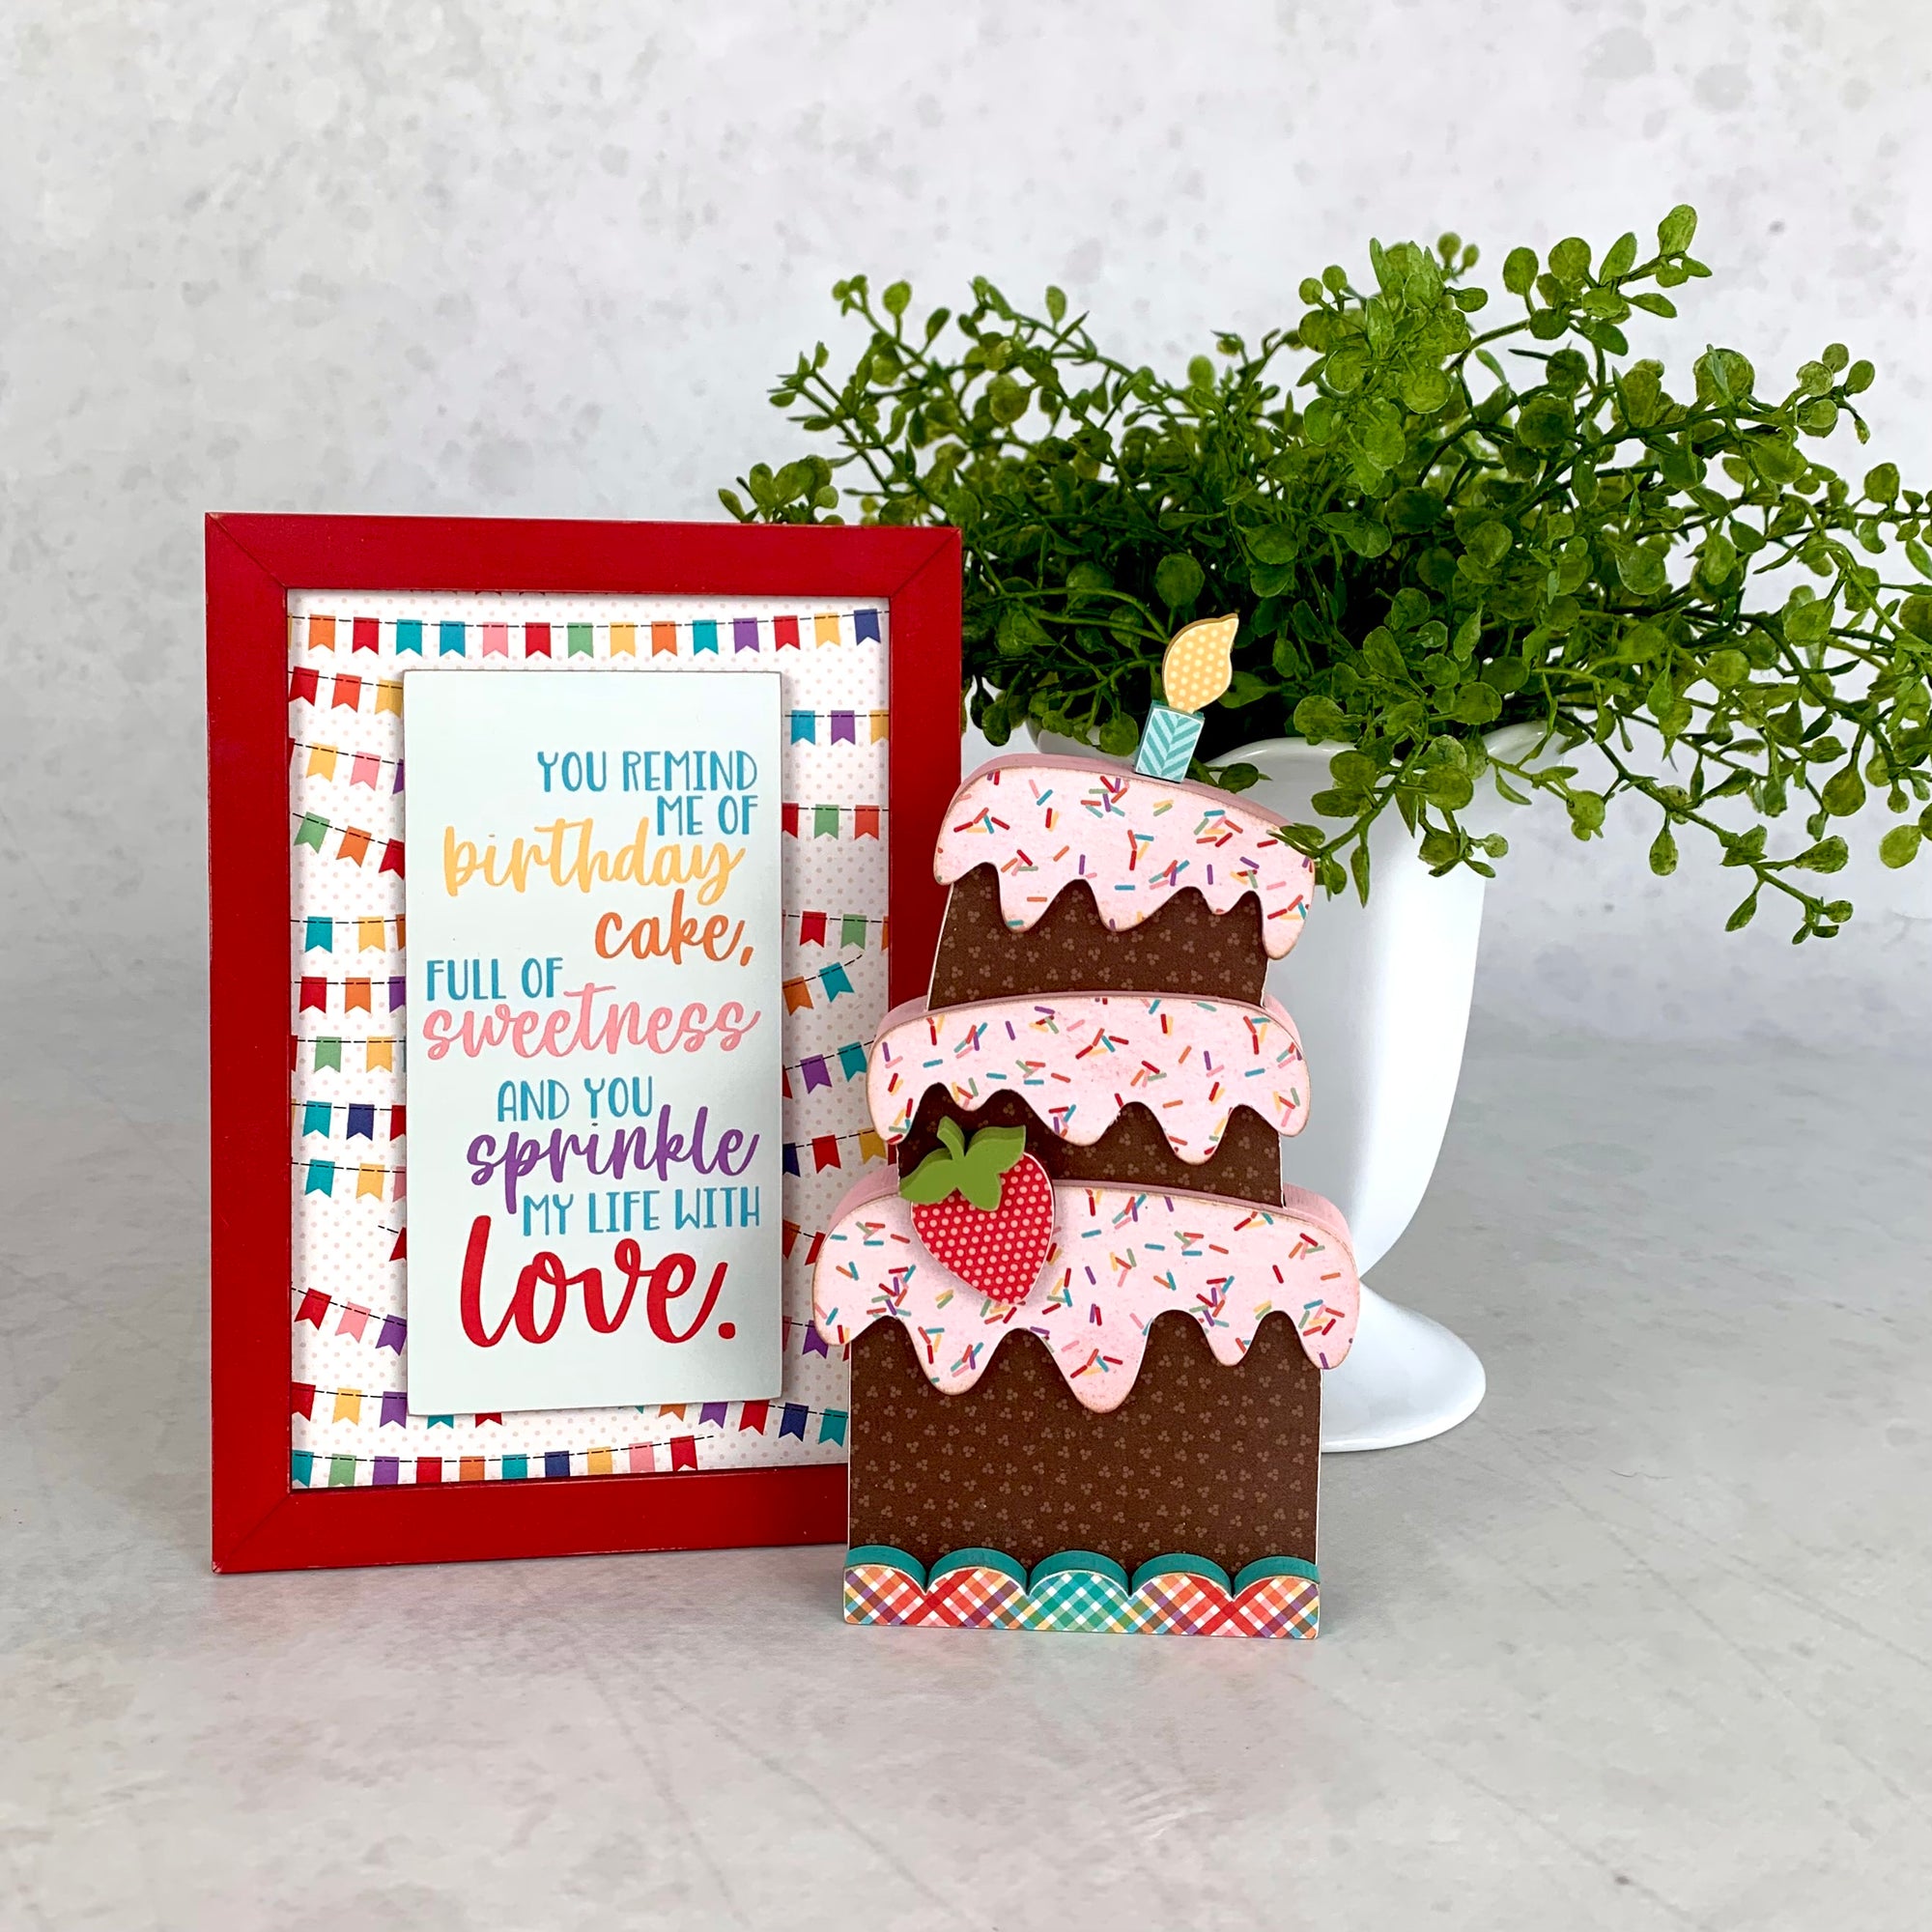 Birthday cake wood decor with sprinkles phrase sign.  Birthday party decor.  Handmade birthday party decor.  Birthday parties decor ideas. Cute birthday cake with sign. 